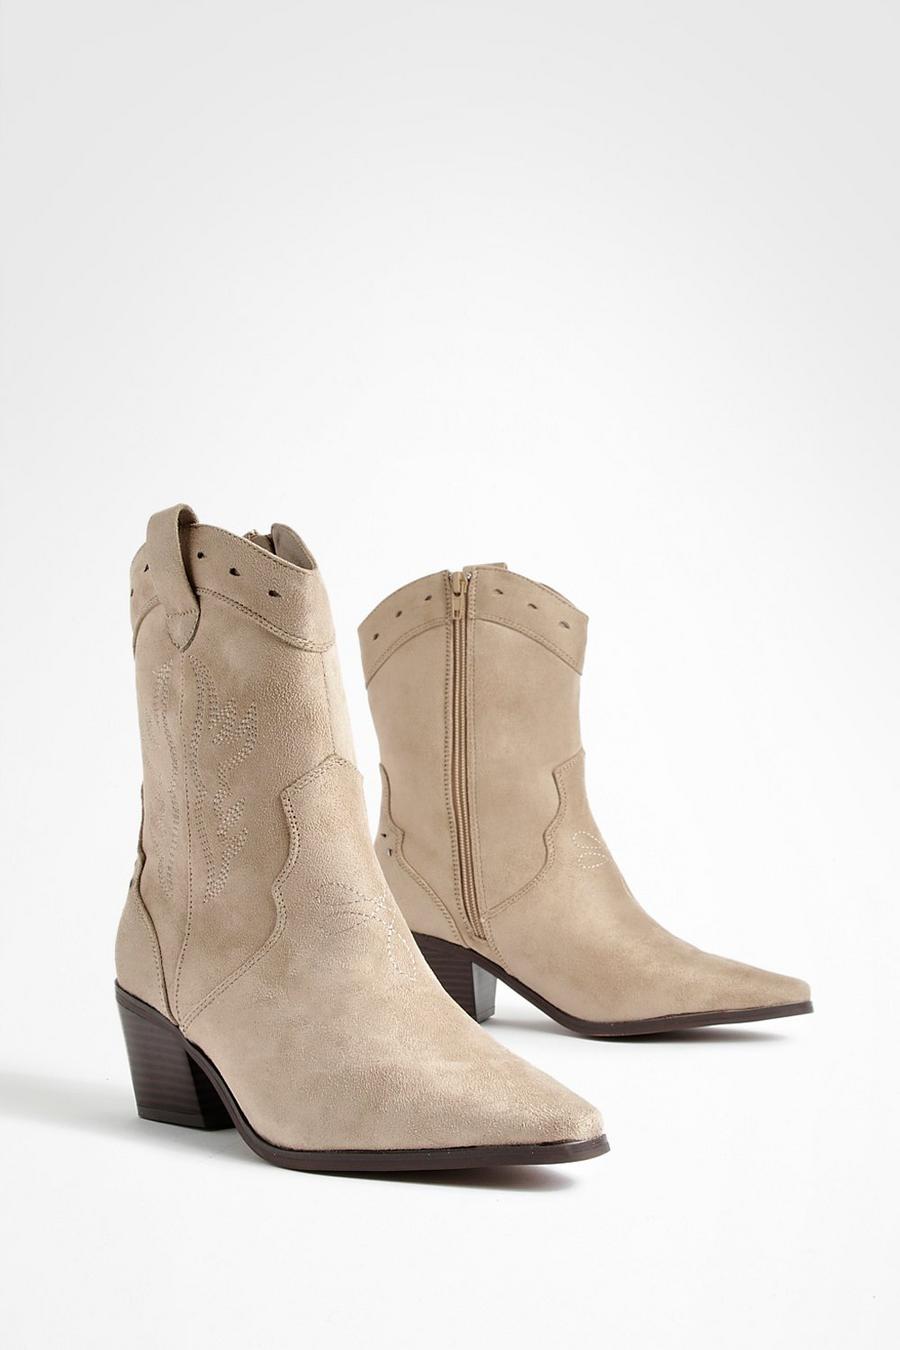 Stivali da cowboy stile Western con cut-out, Taupe image number 1